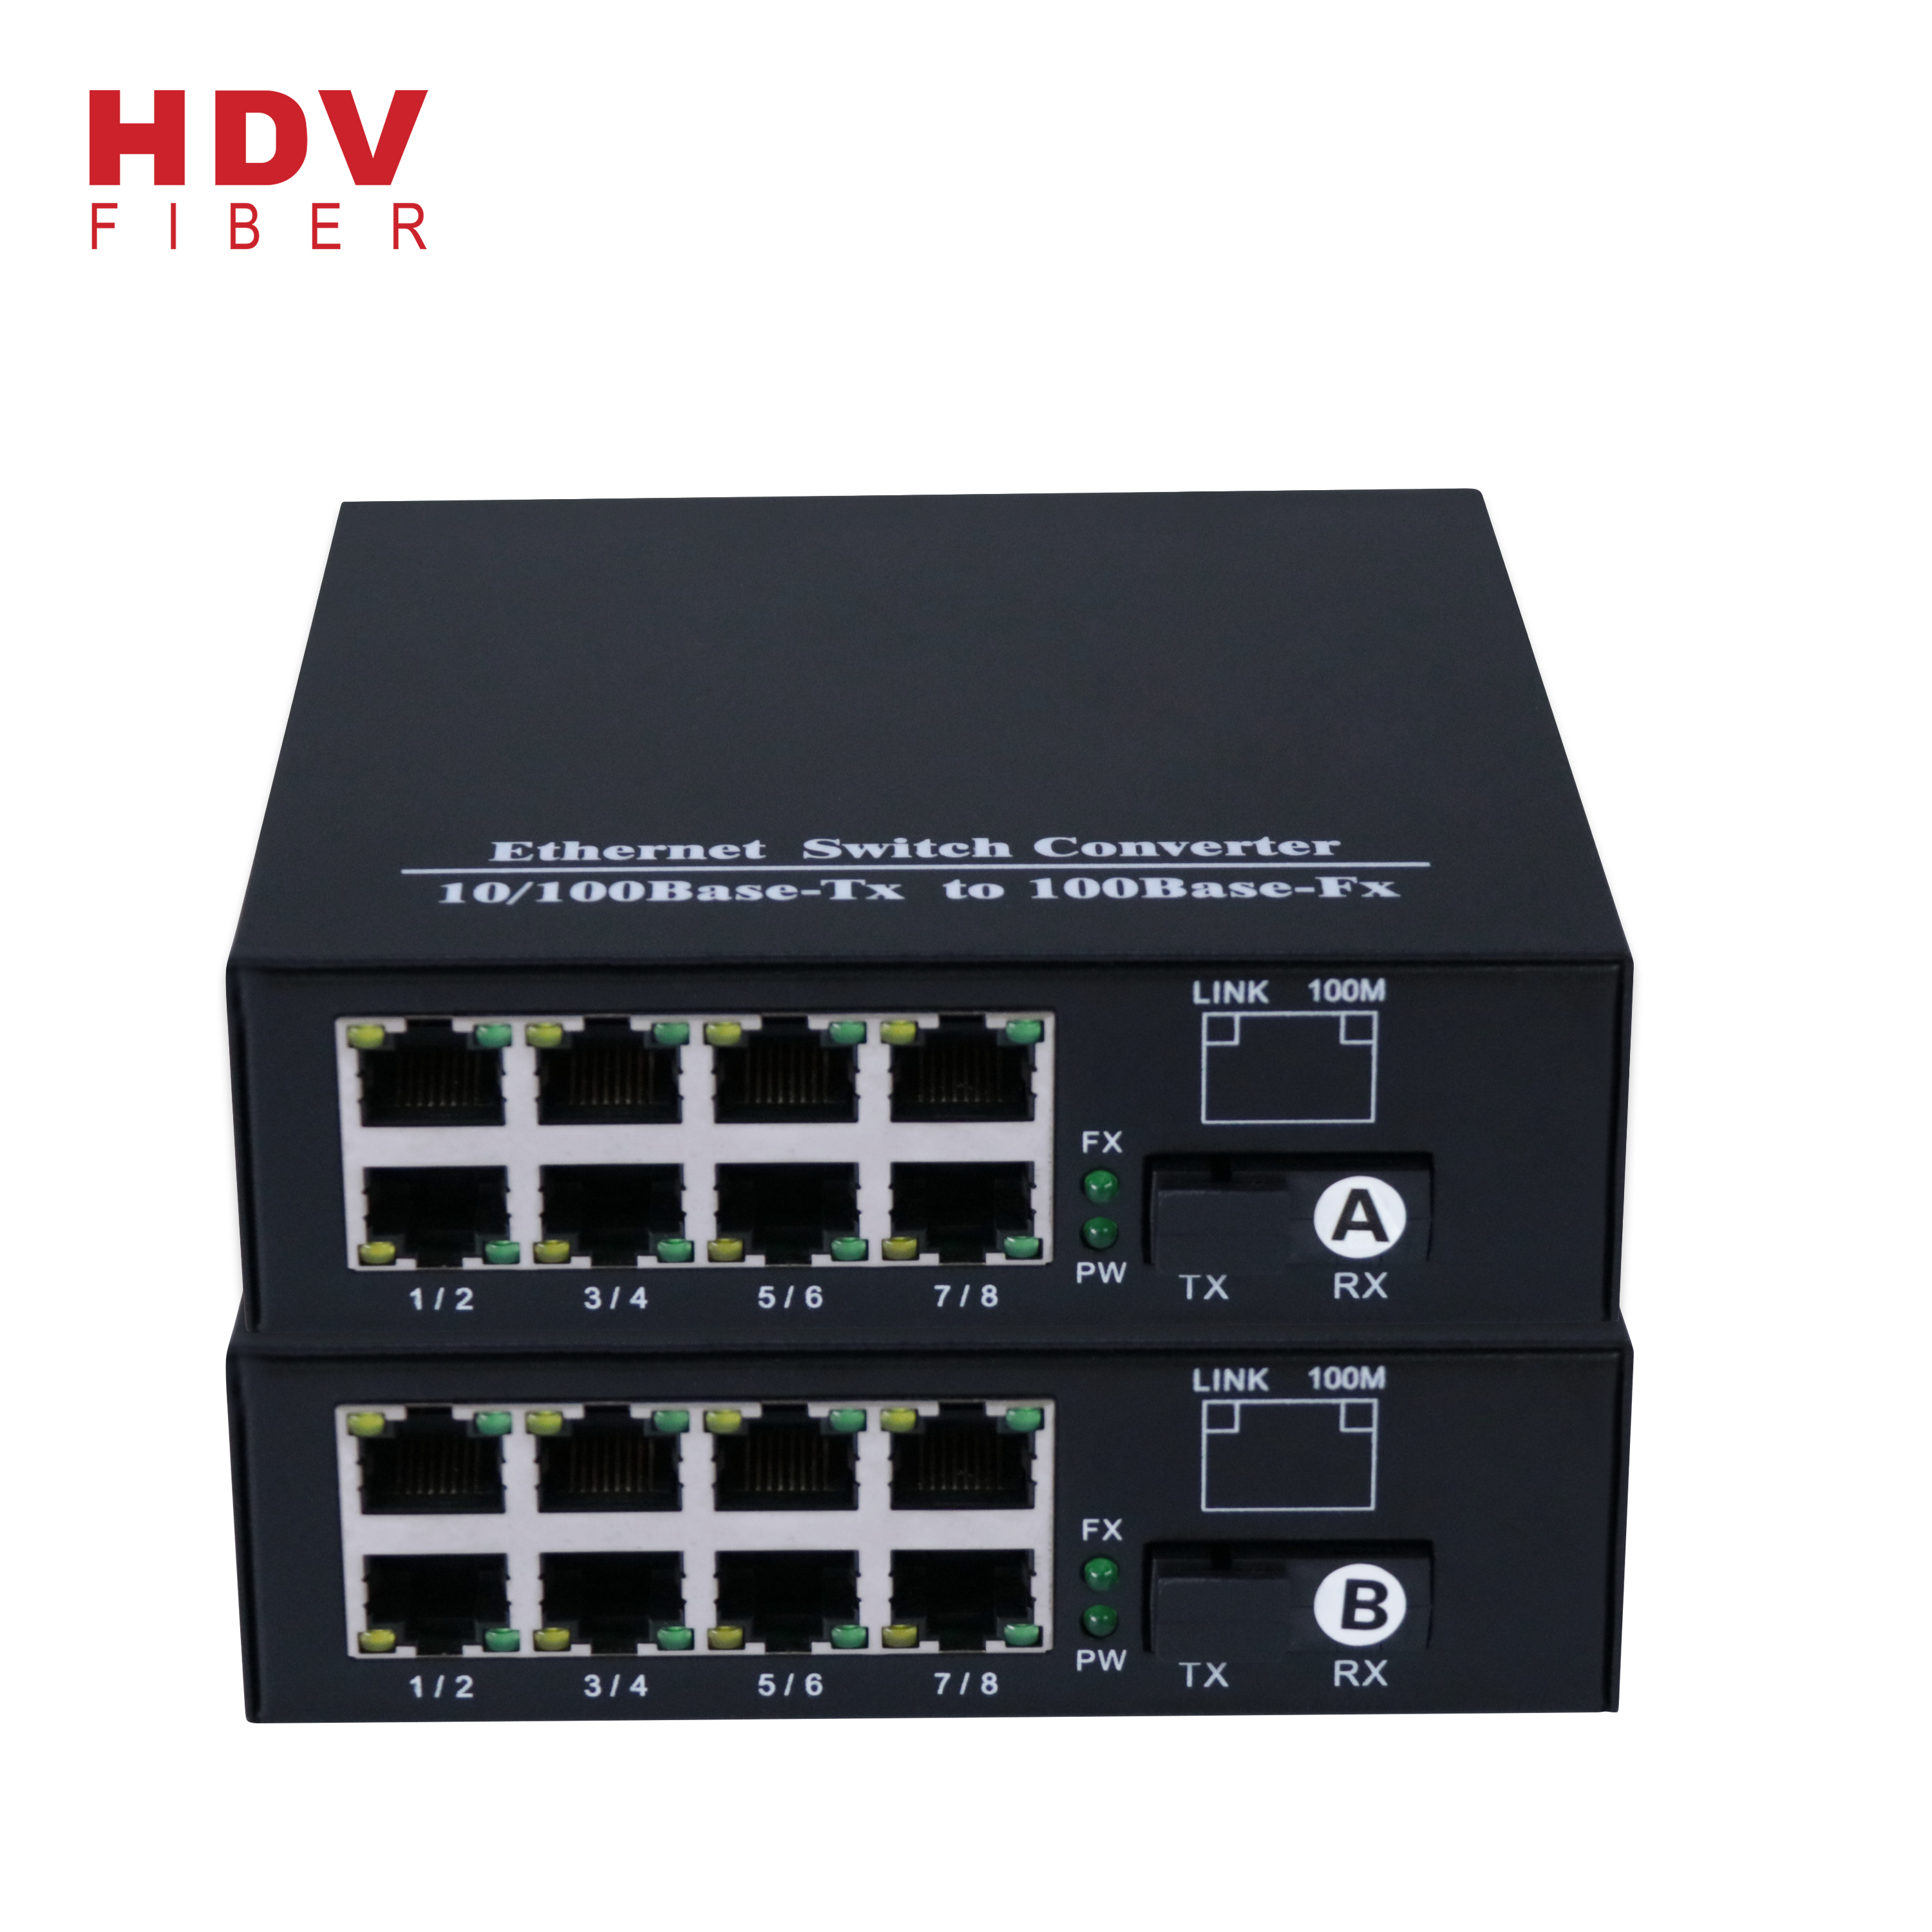 Factory Cheap Hot Fiber Optic Switch - Fast 8 port ethernet switch 10 / 100 Mbps network switch Compatible cisco – HDV